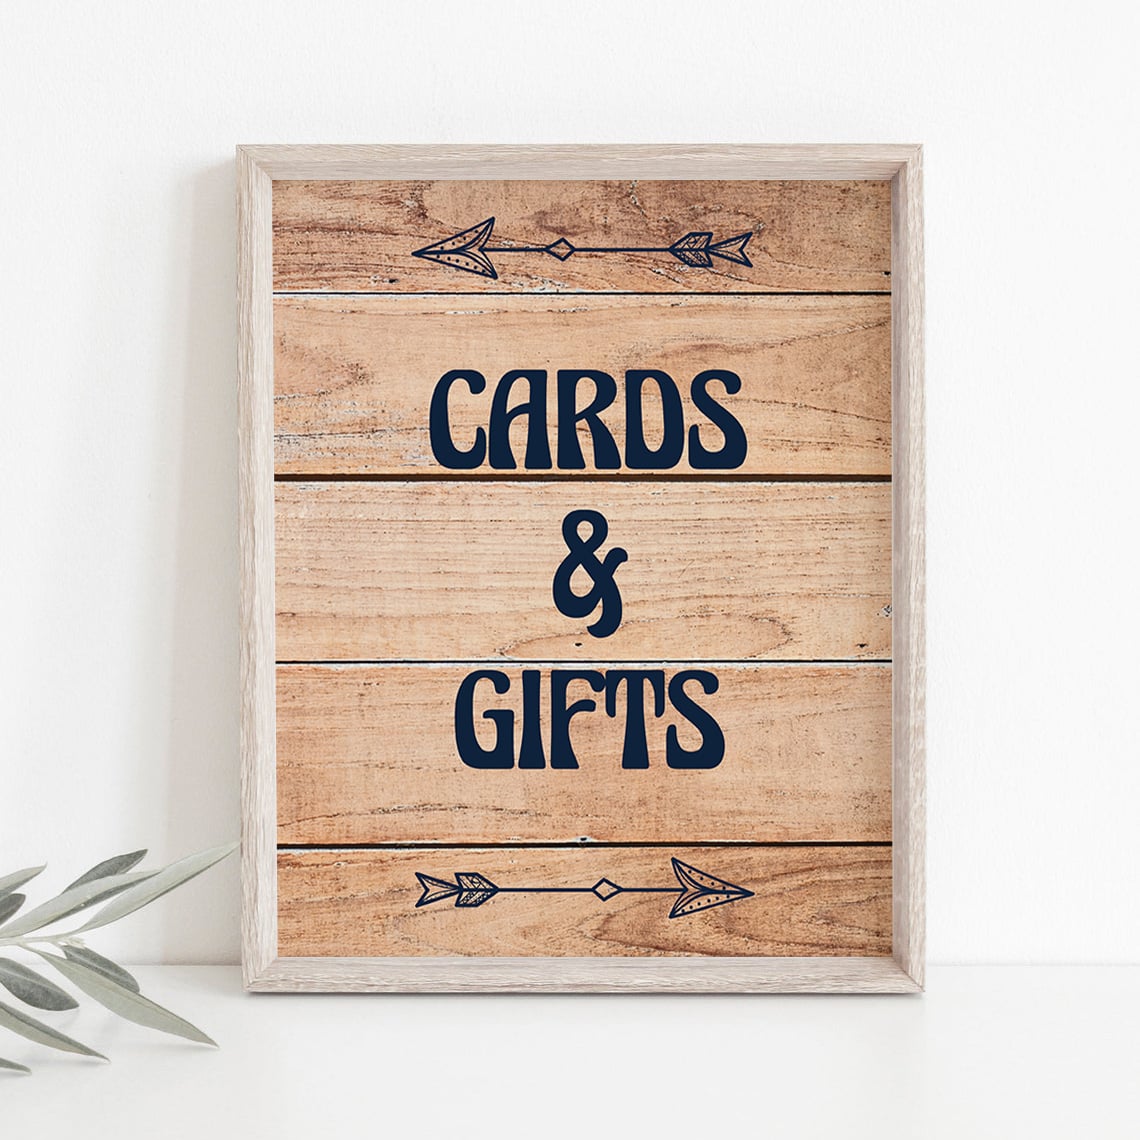 Cards and gifts sign download for rustic party by LittleSizzle